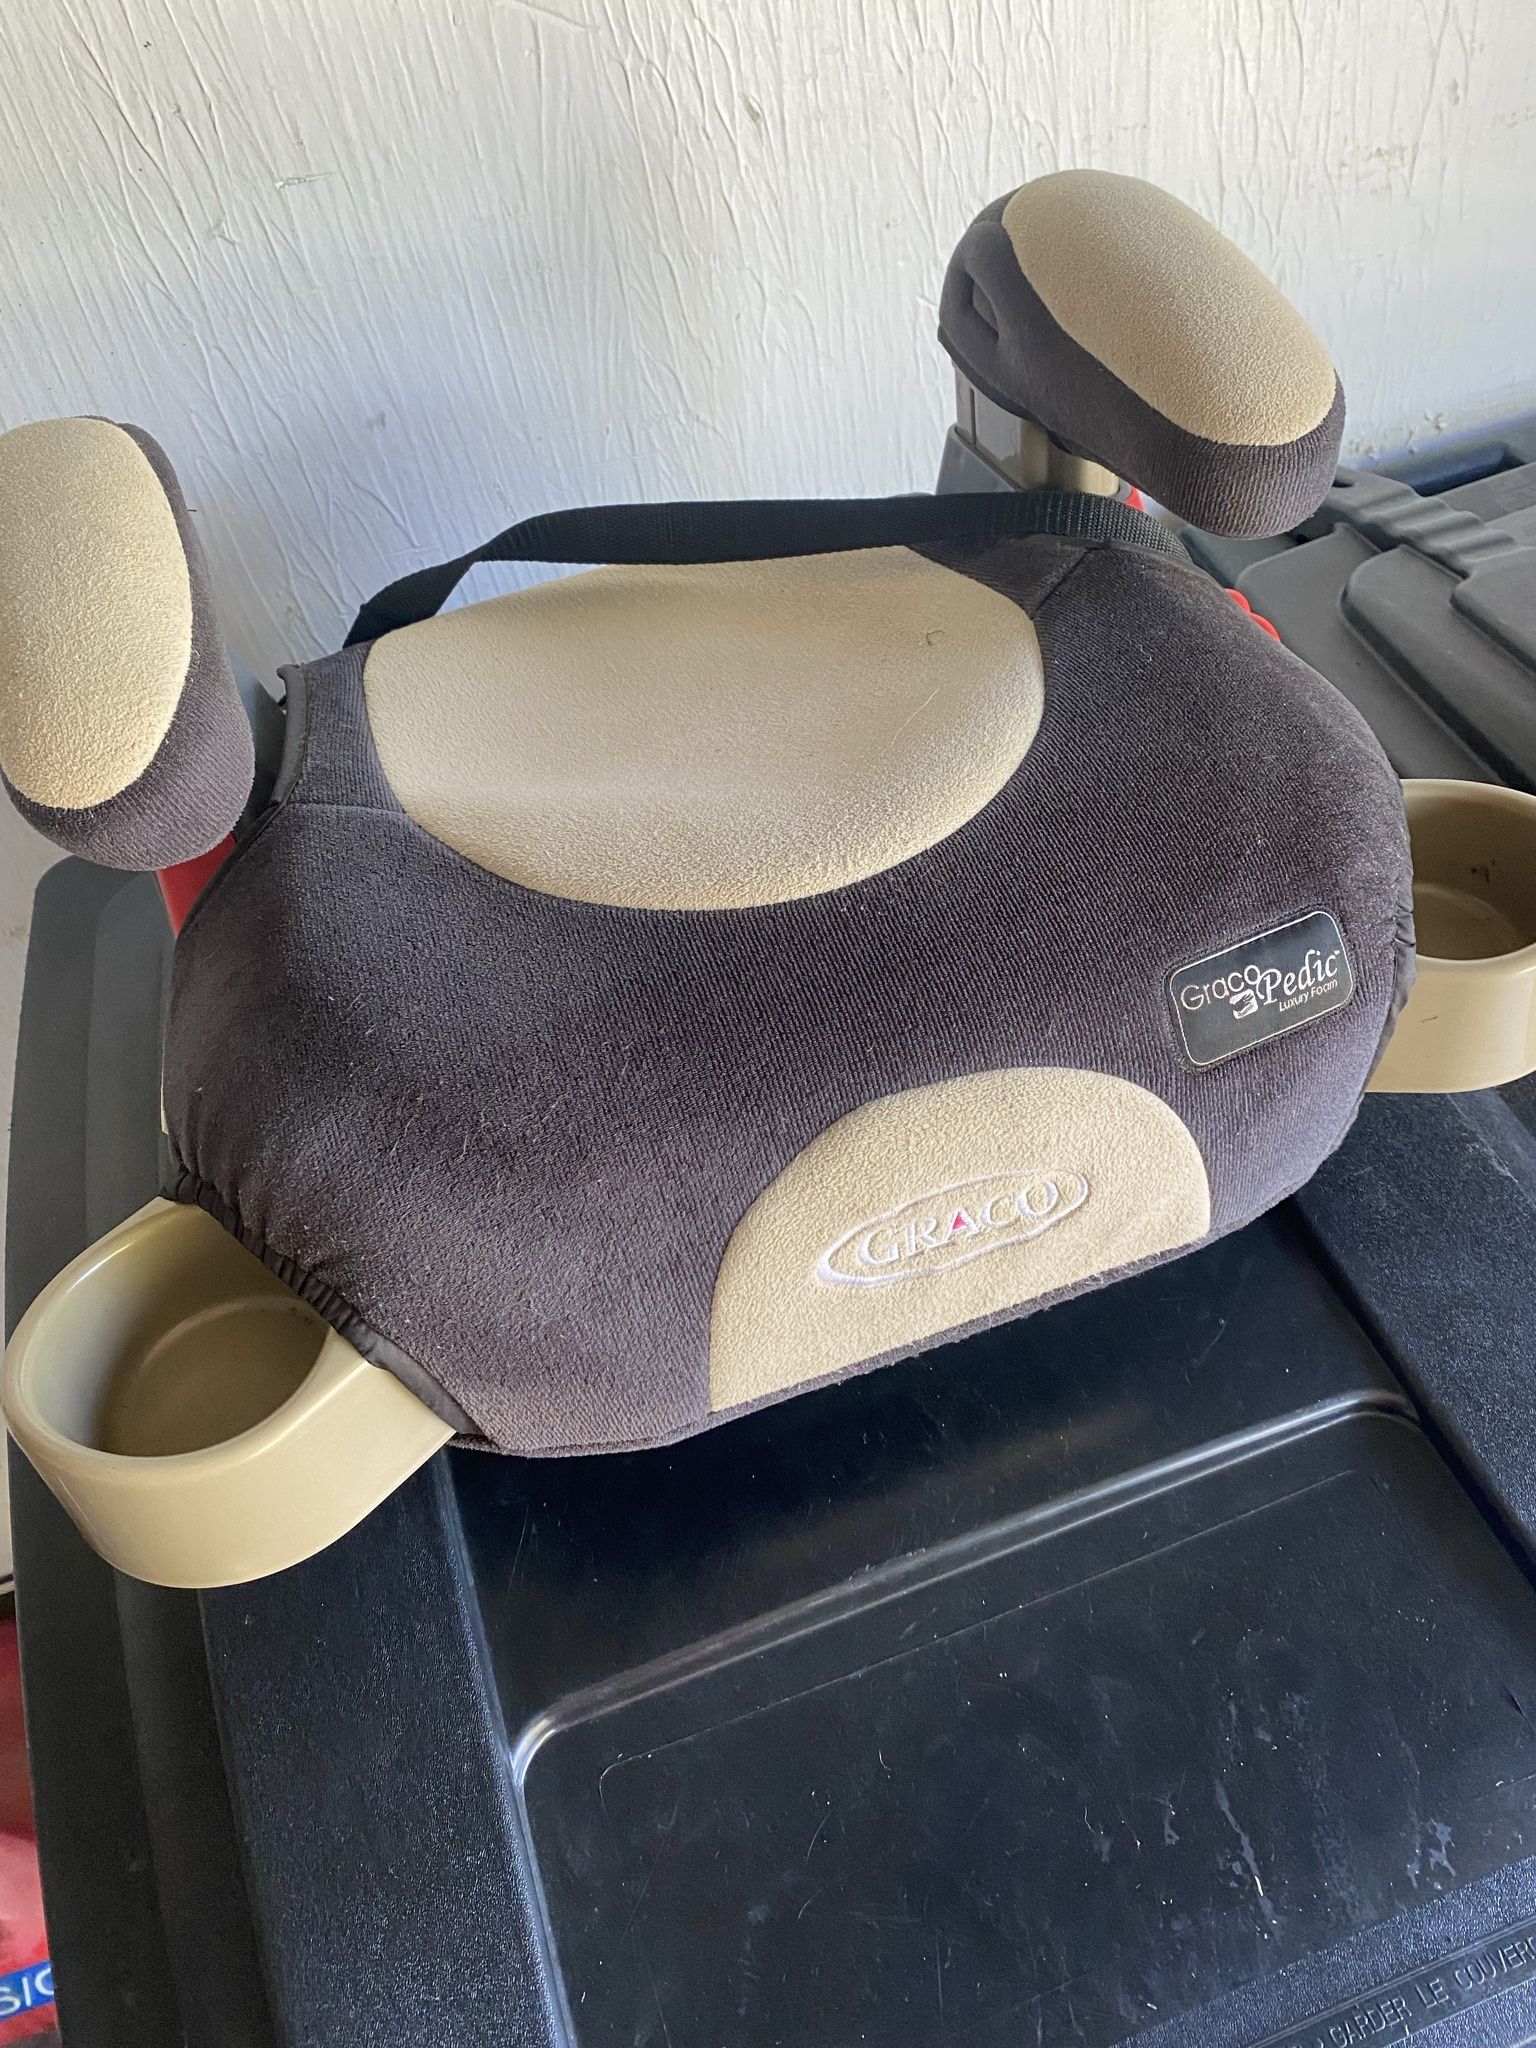 Graco Pedic Luxury Foam Booster Seat with Cup Holders!  In great shape!  